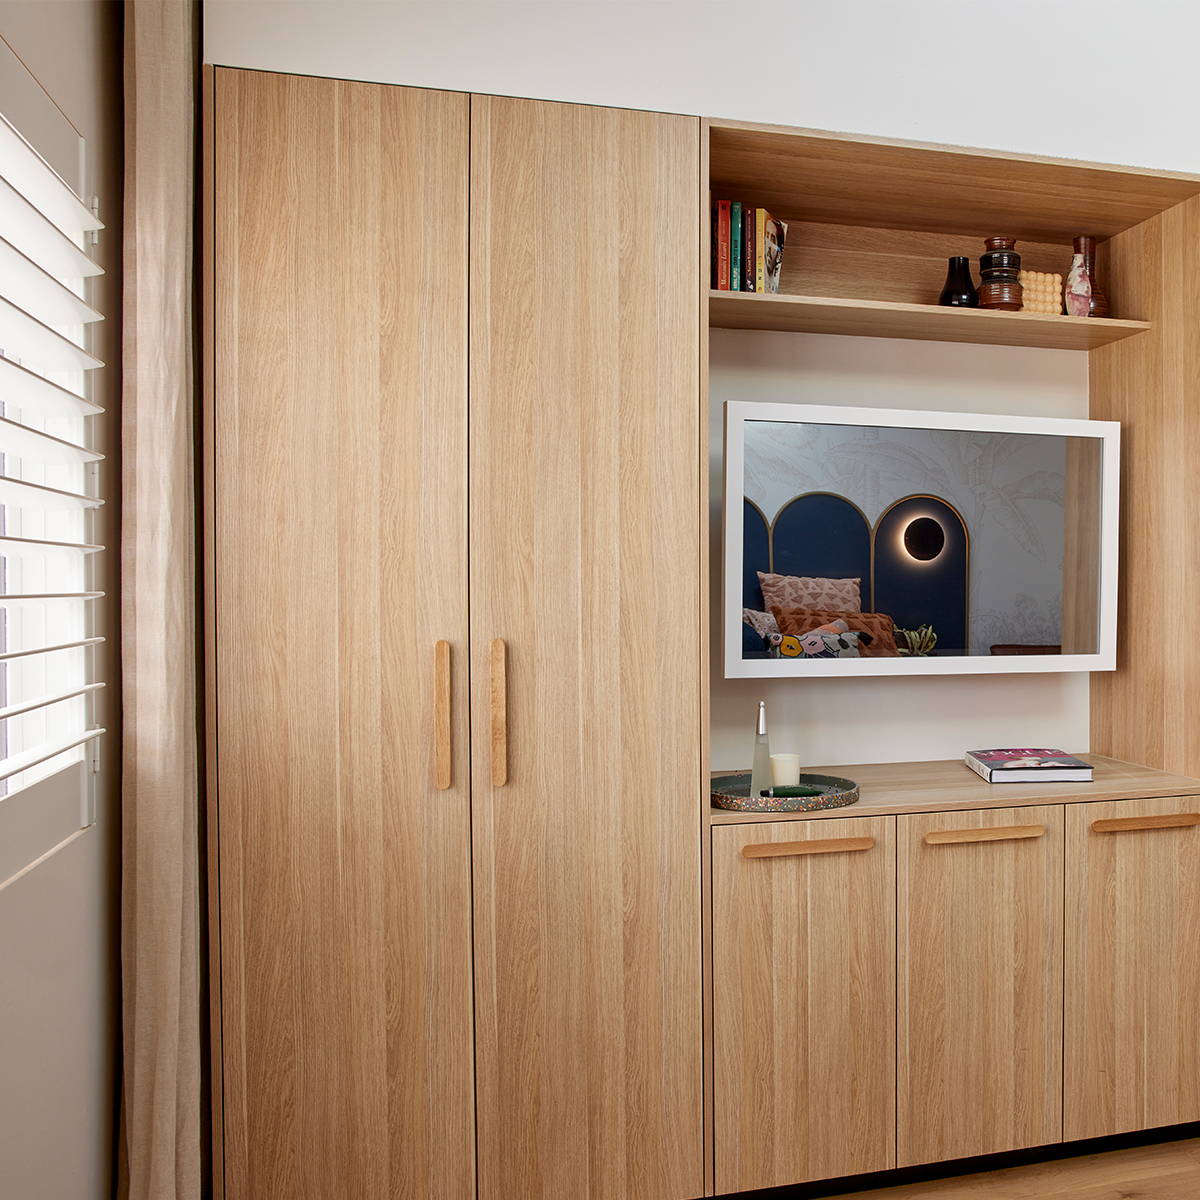 TV-Mirror Modern Matte White Frame by FRAMING TO A T - A square white frame on a TV-Mirror inset into oak cabinetry